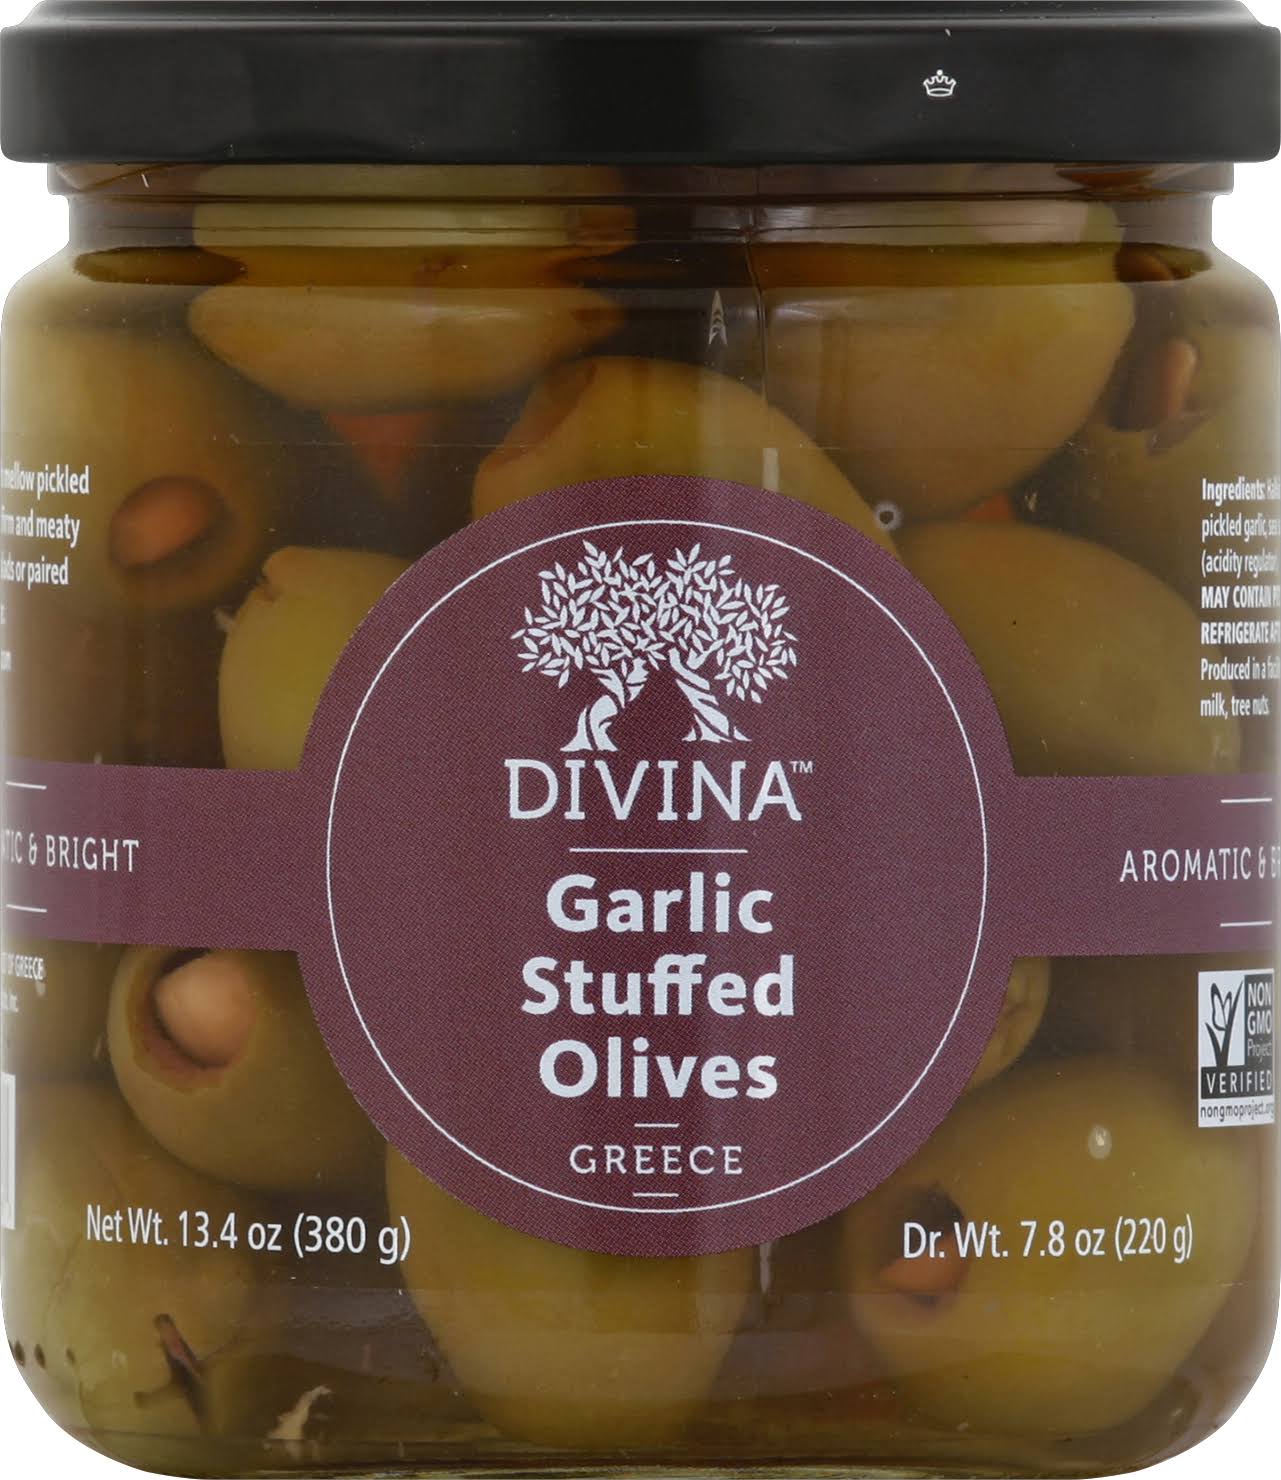 Divina Green Stuffed - with Garlic Olives, 7.8oz